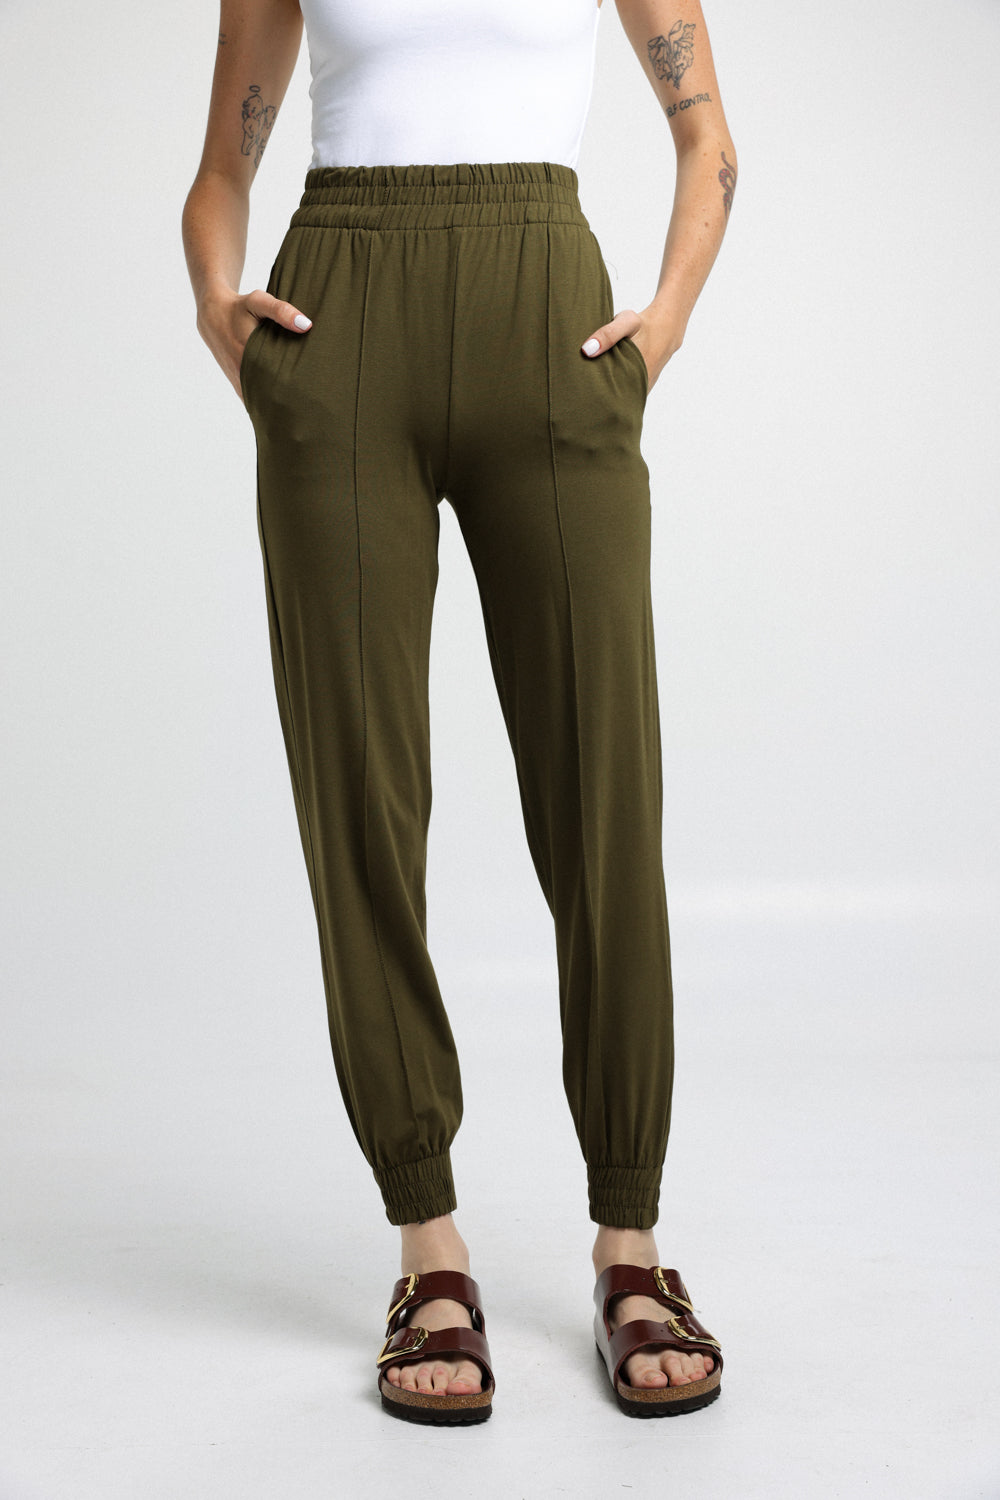 Best Olive Green Joggers